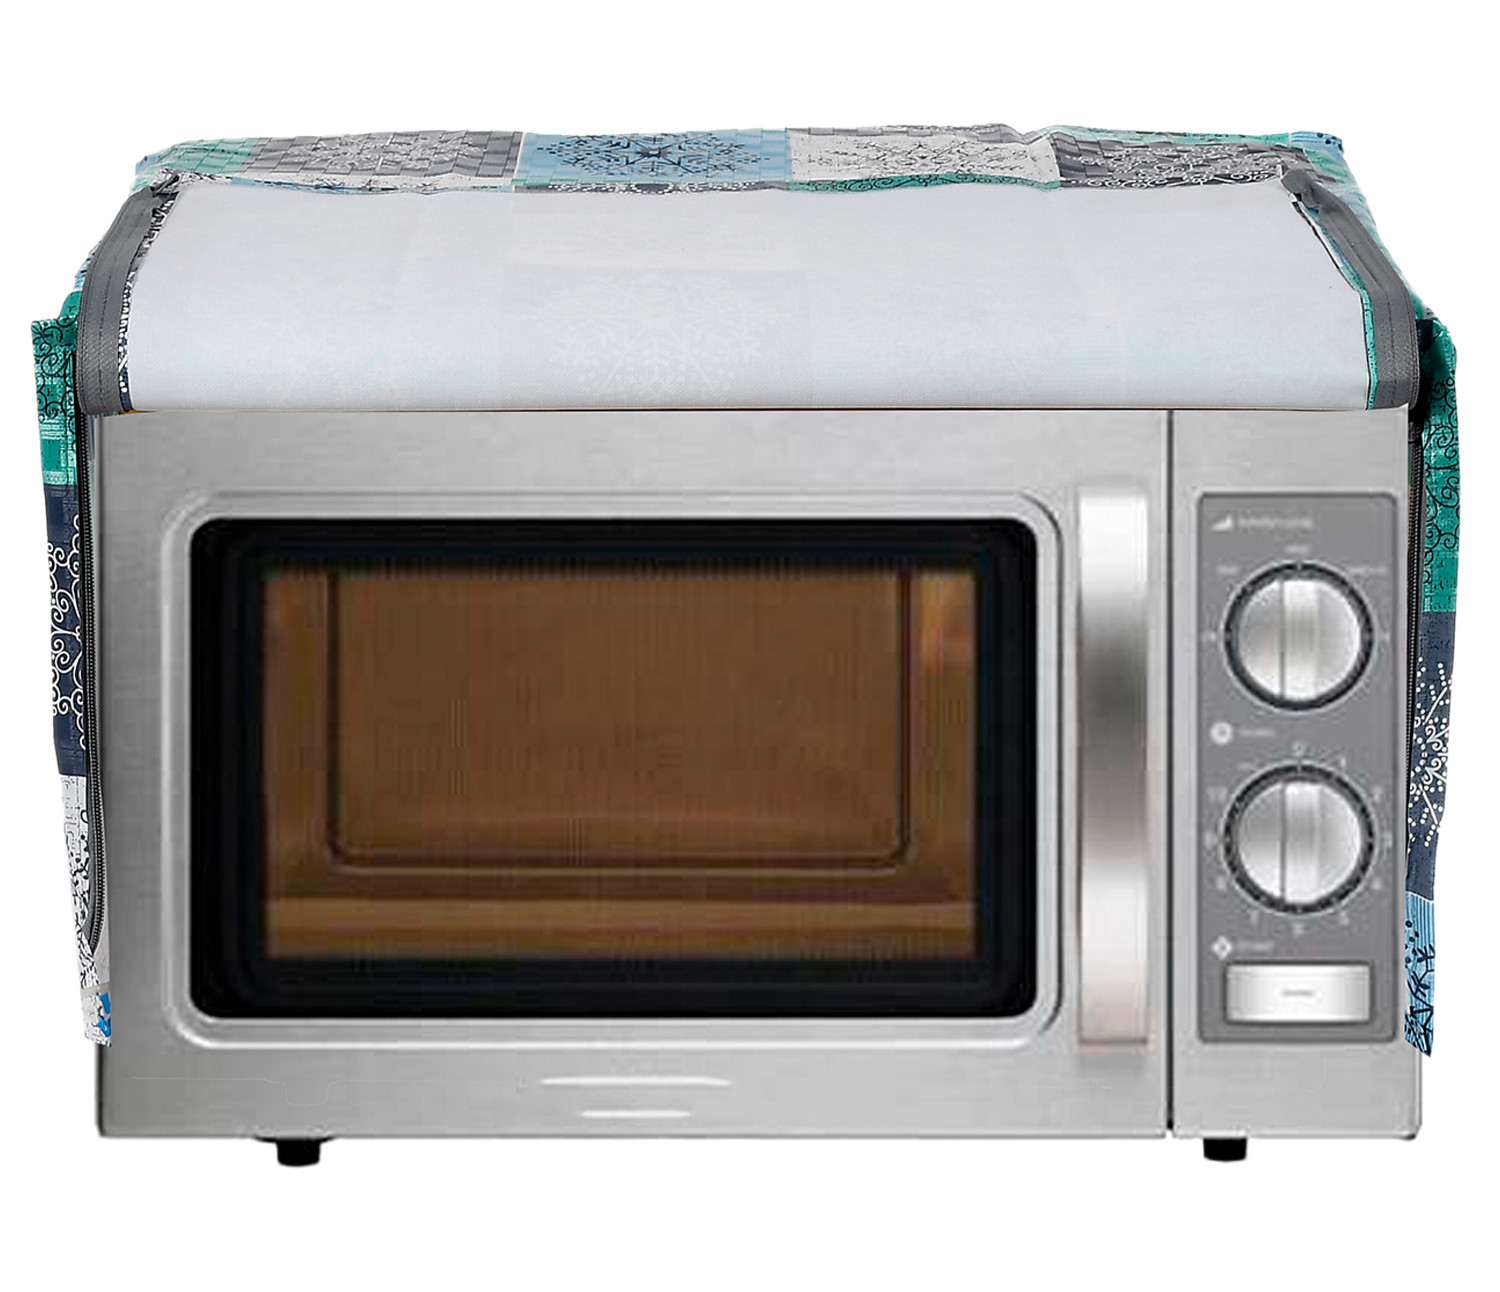 Kuber Industries PVC Check Printed Microwave Oven Cover, Dustproof Machine Protector Cover,23 Ltr. (Sky Blue)